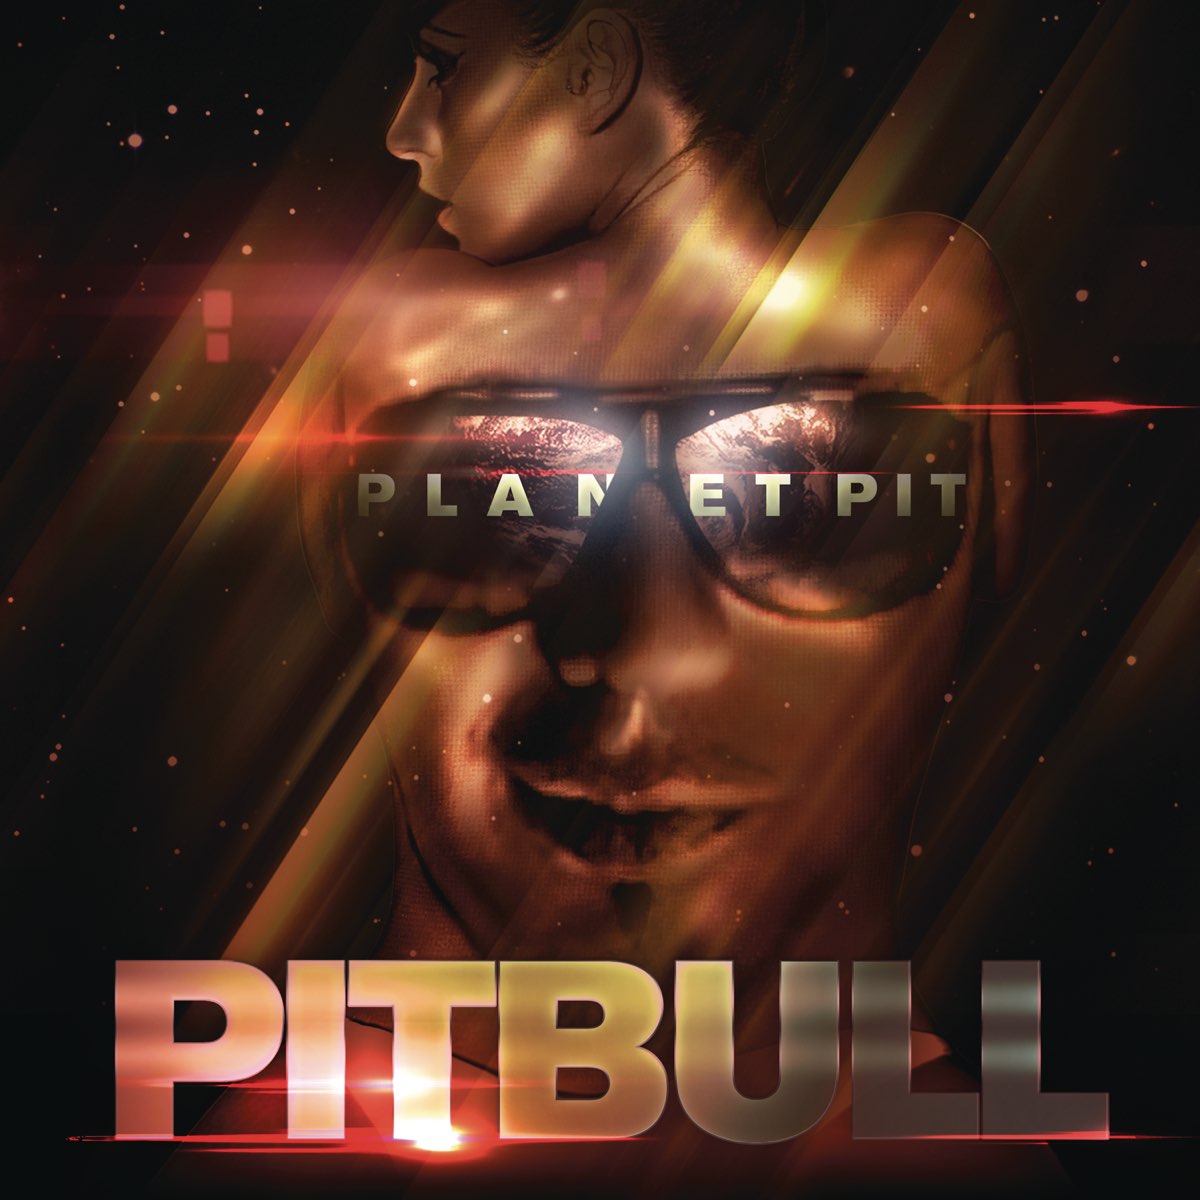 ‎Planet Pit (Deluxe Version) by Pitbull on Apple Music